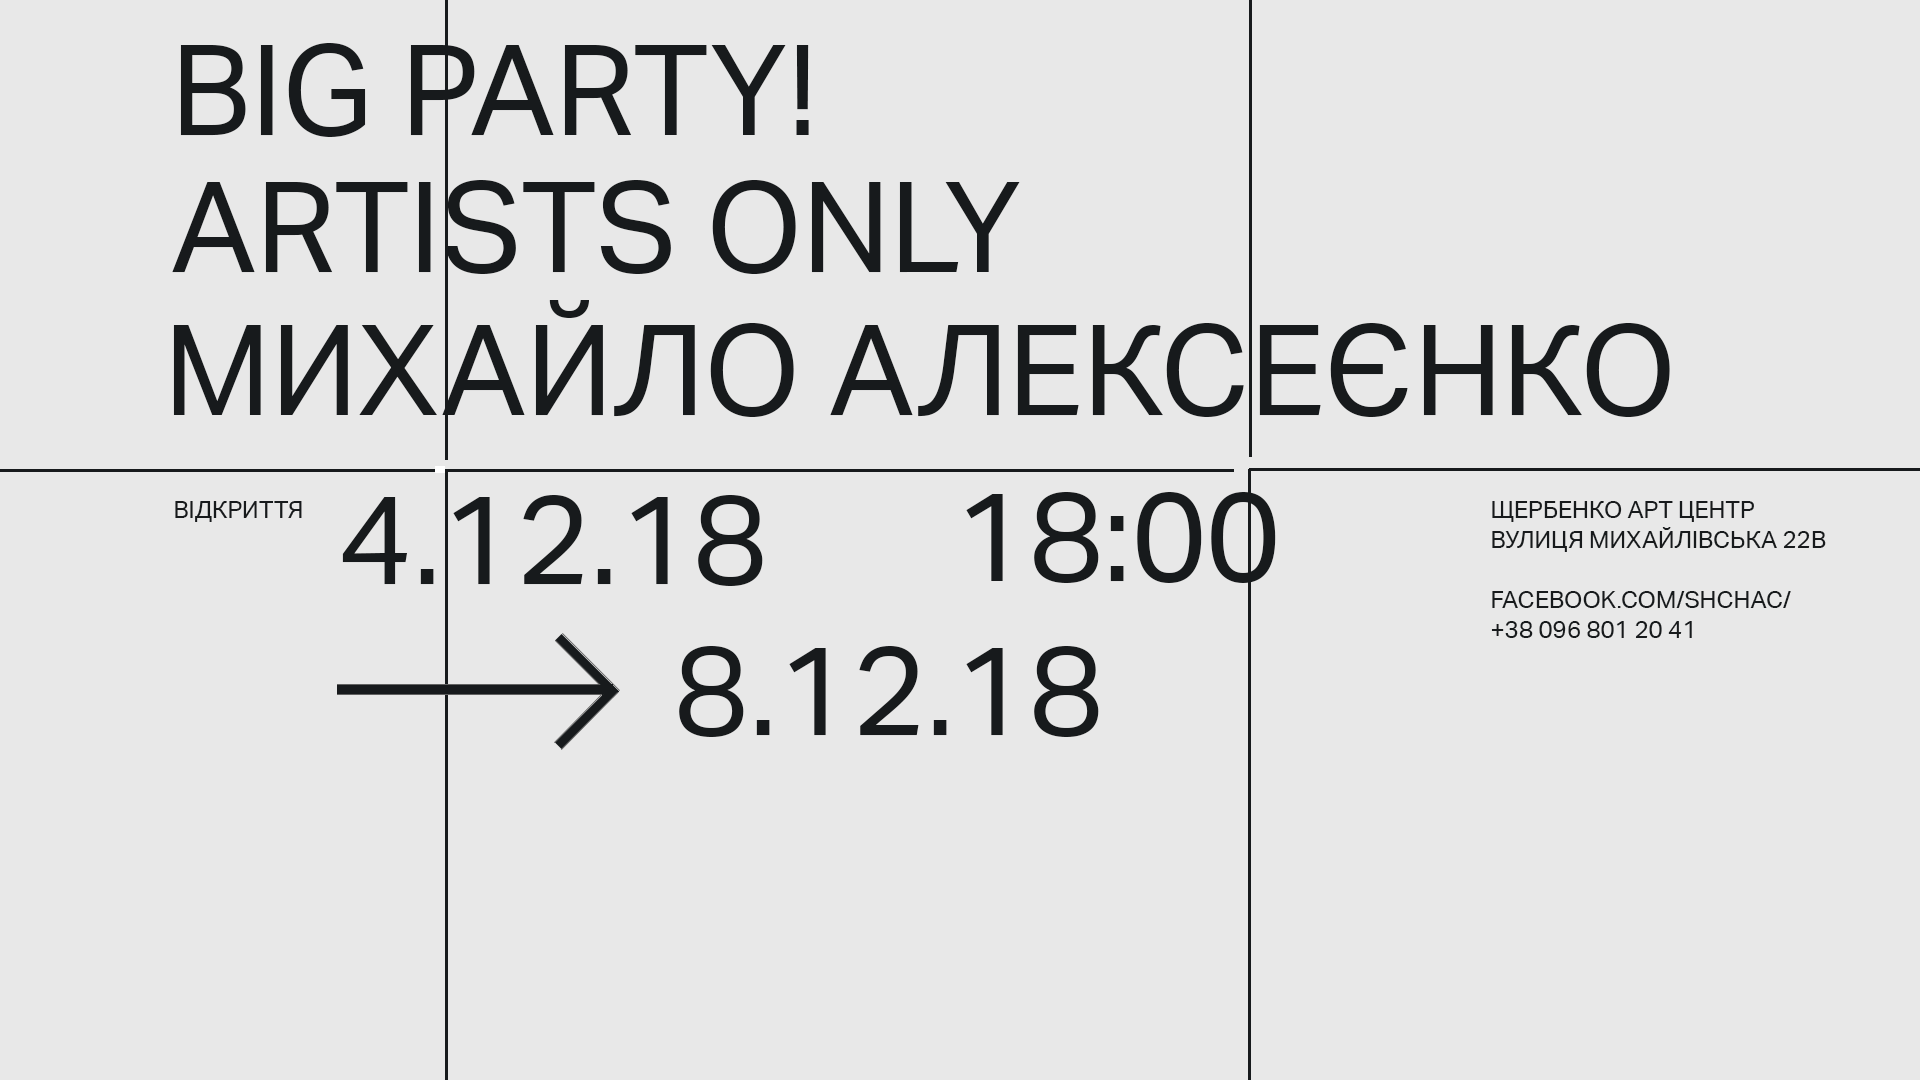 «BIG PARTY! FOR ARTISTS ONLY!» в Щербенко Арт Центр